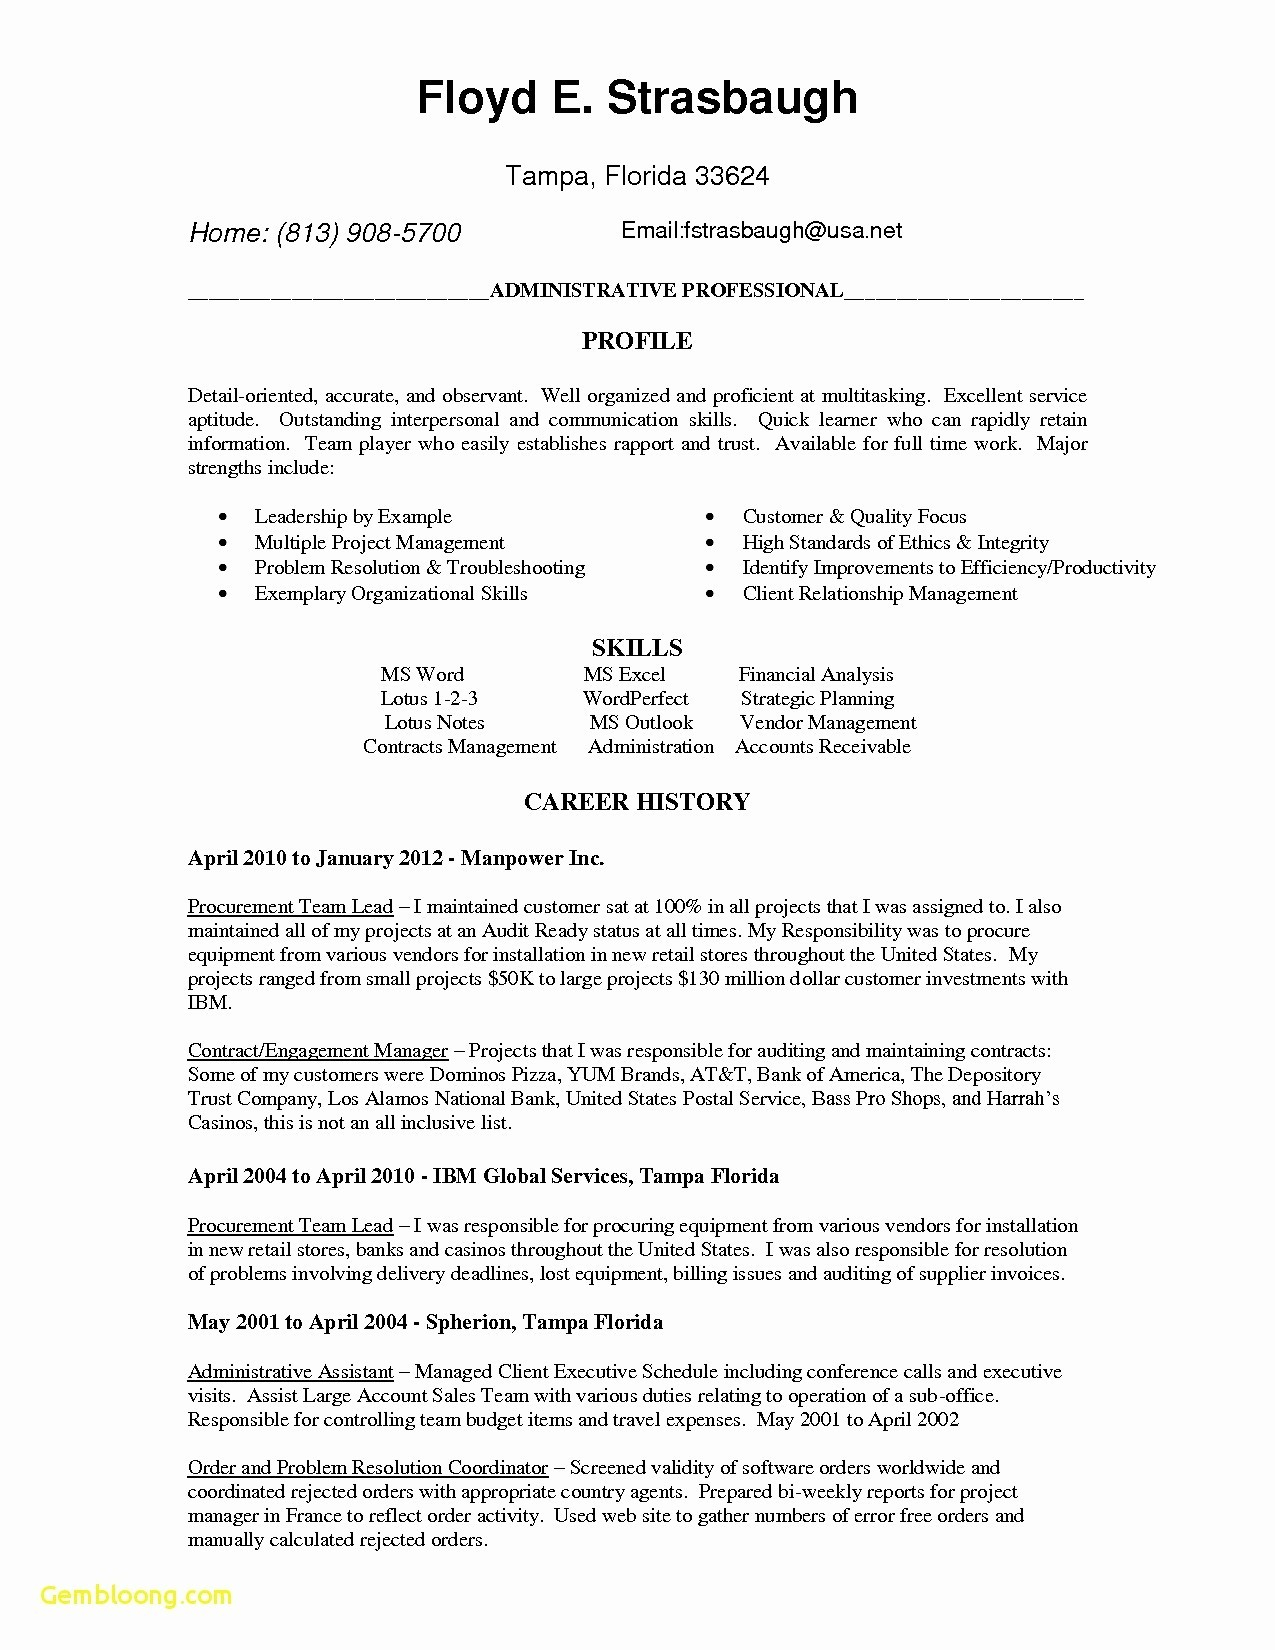 Career Change Cover Letter Template - Career Change Resume Template Unique Cover Letter Template for A Job